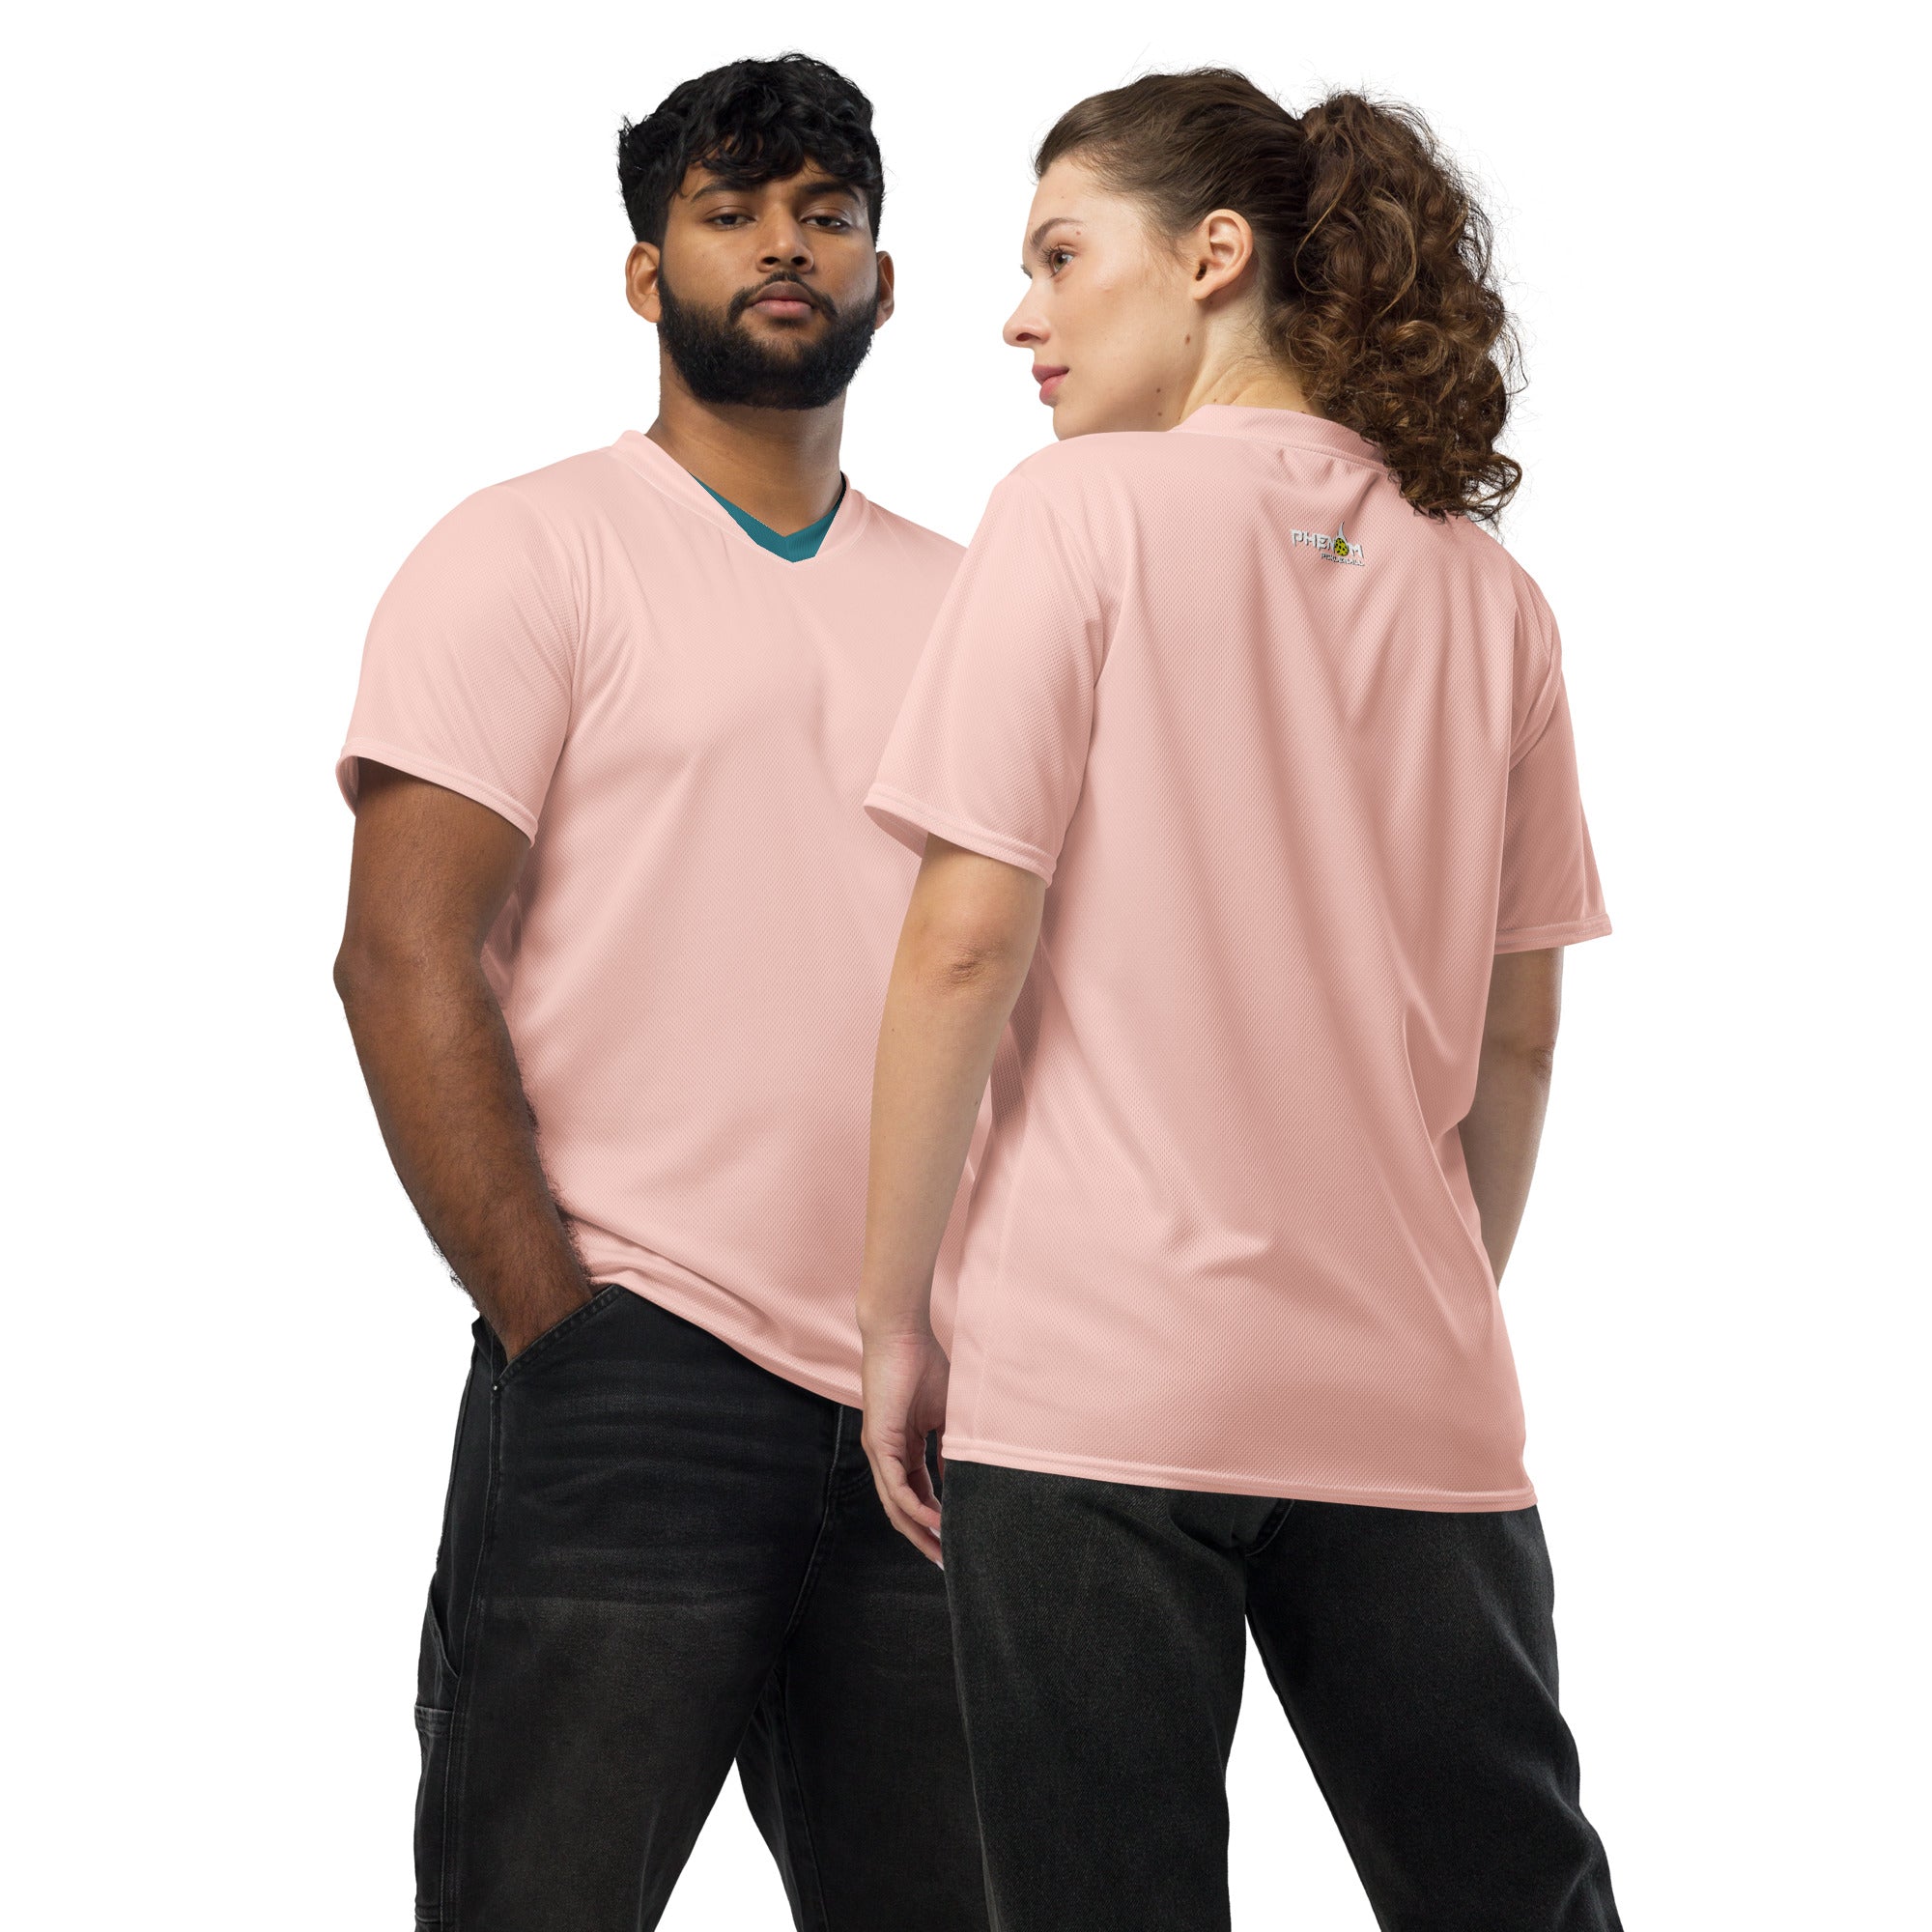 couple wearing pink match point pickleball shirt performance apparel athletic top phenom logo front view